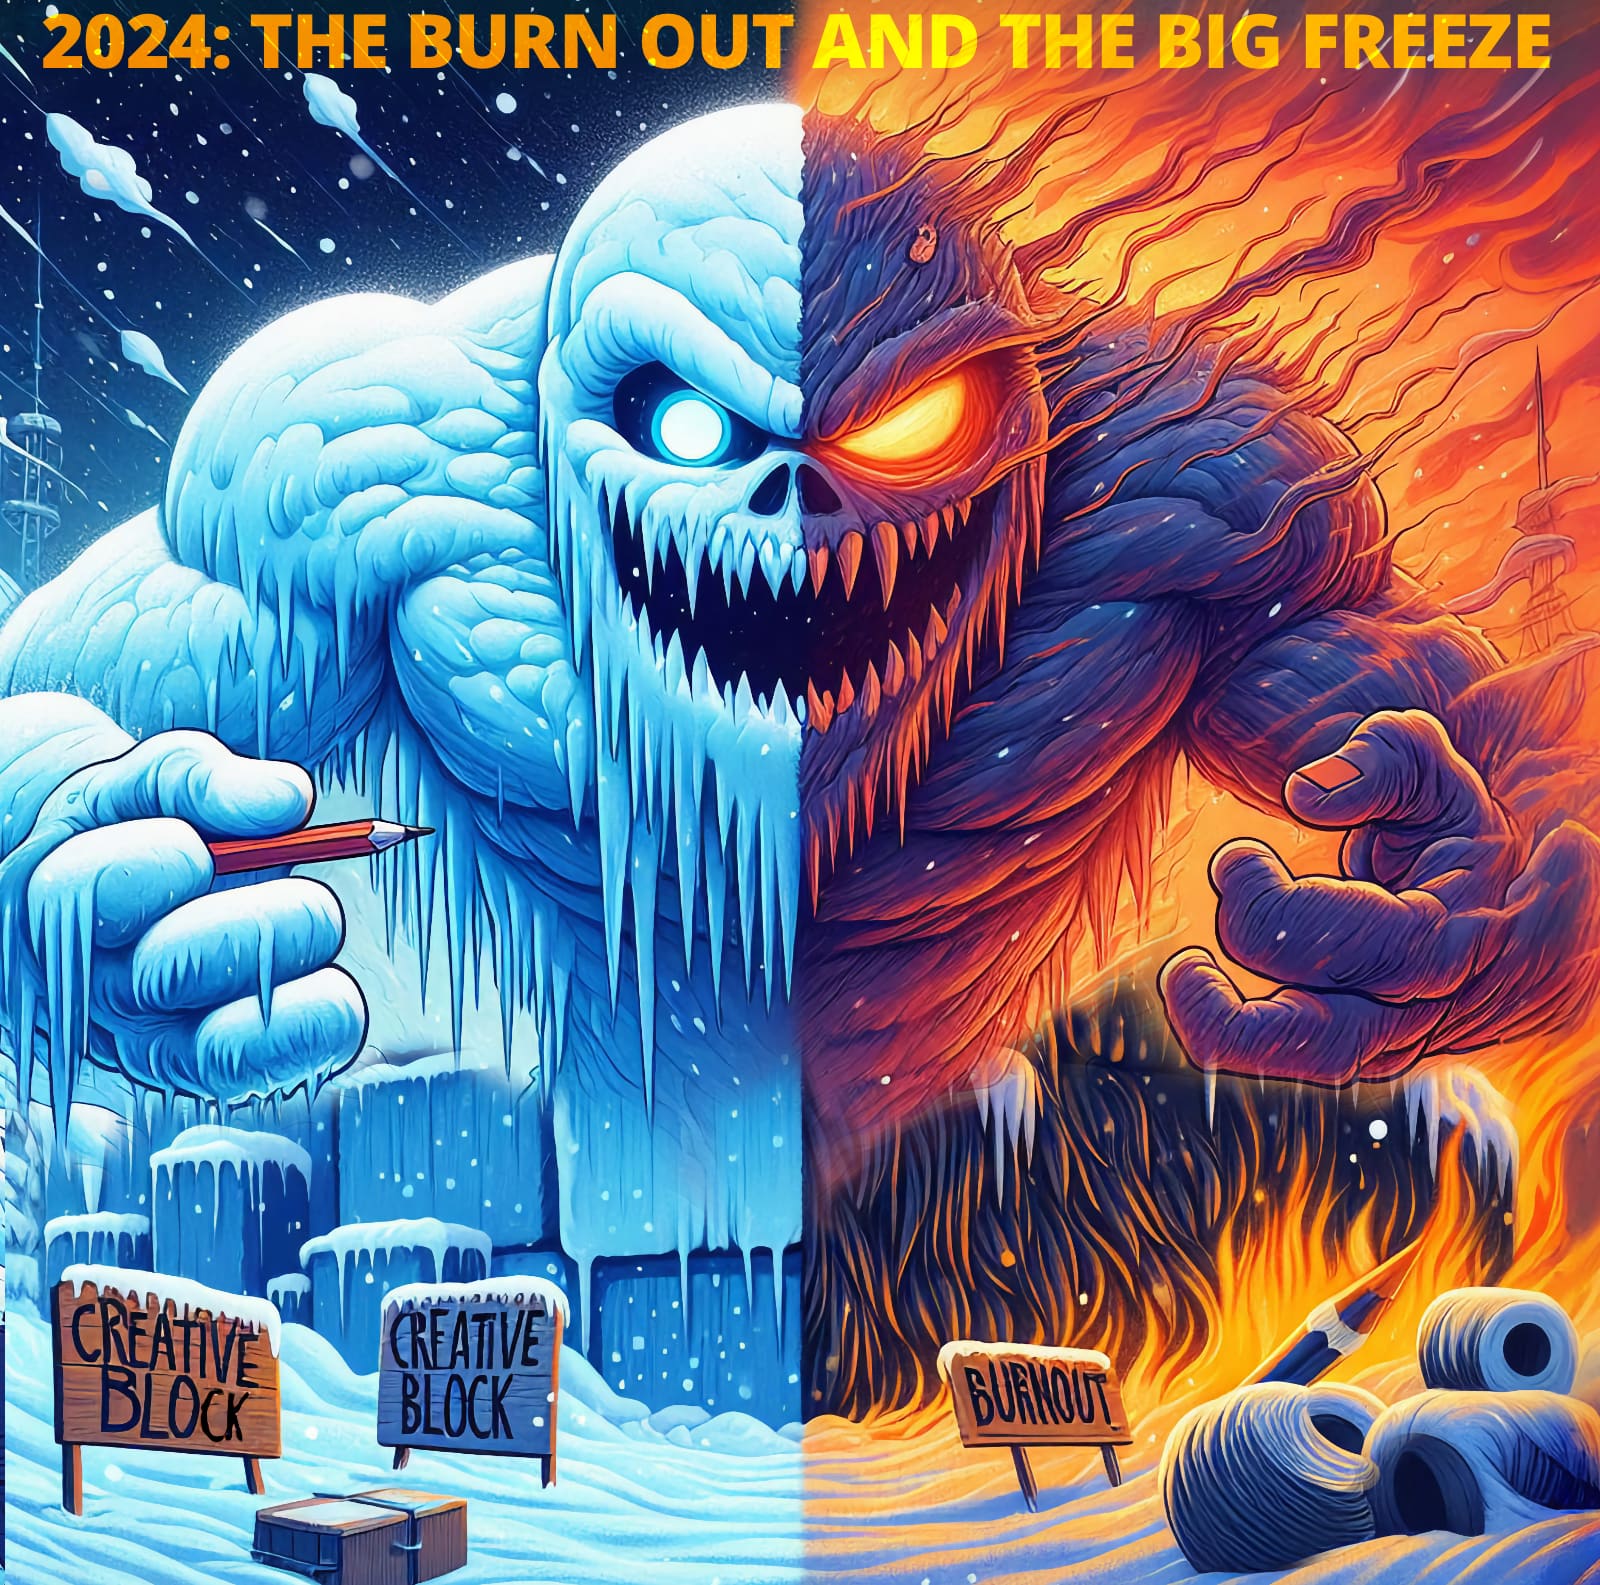 Radio Clash 392 - The Big Freeze and The Burn Out - 2024 Happy New Year